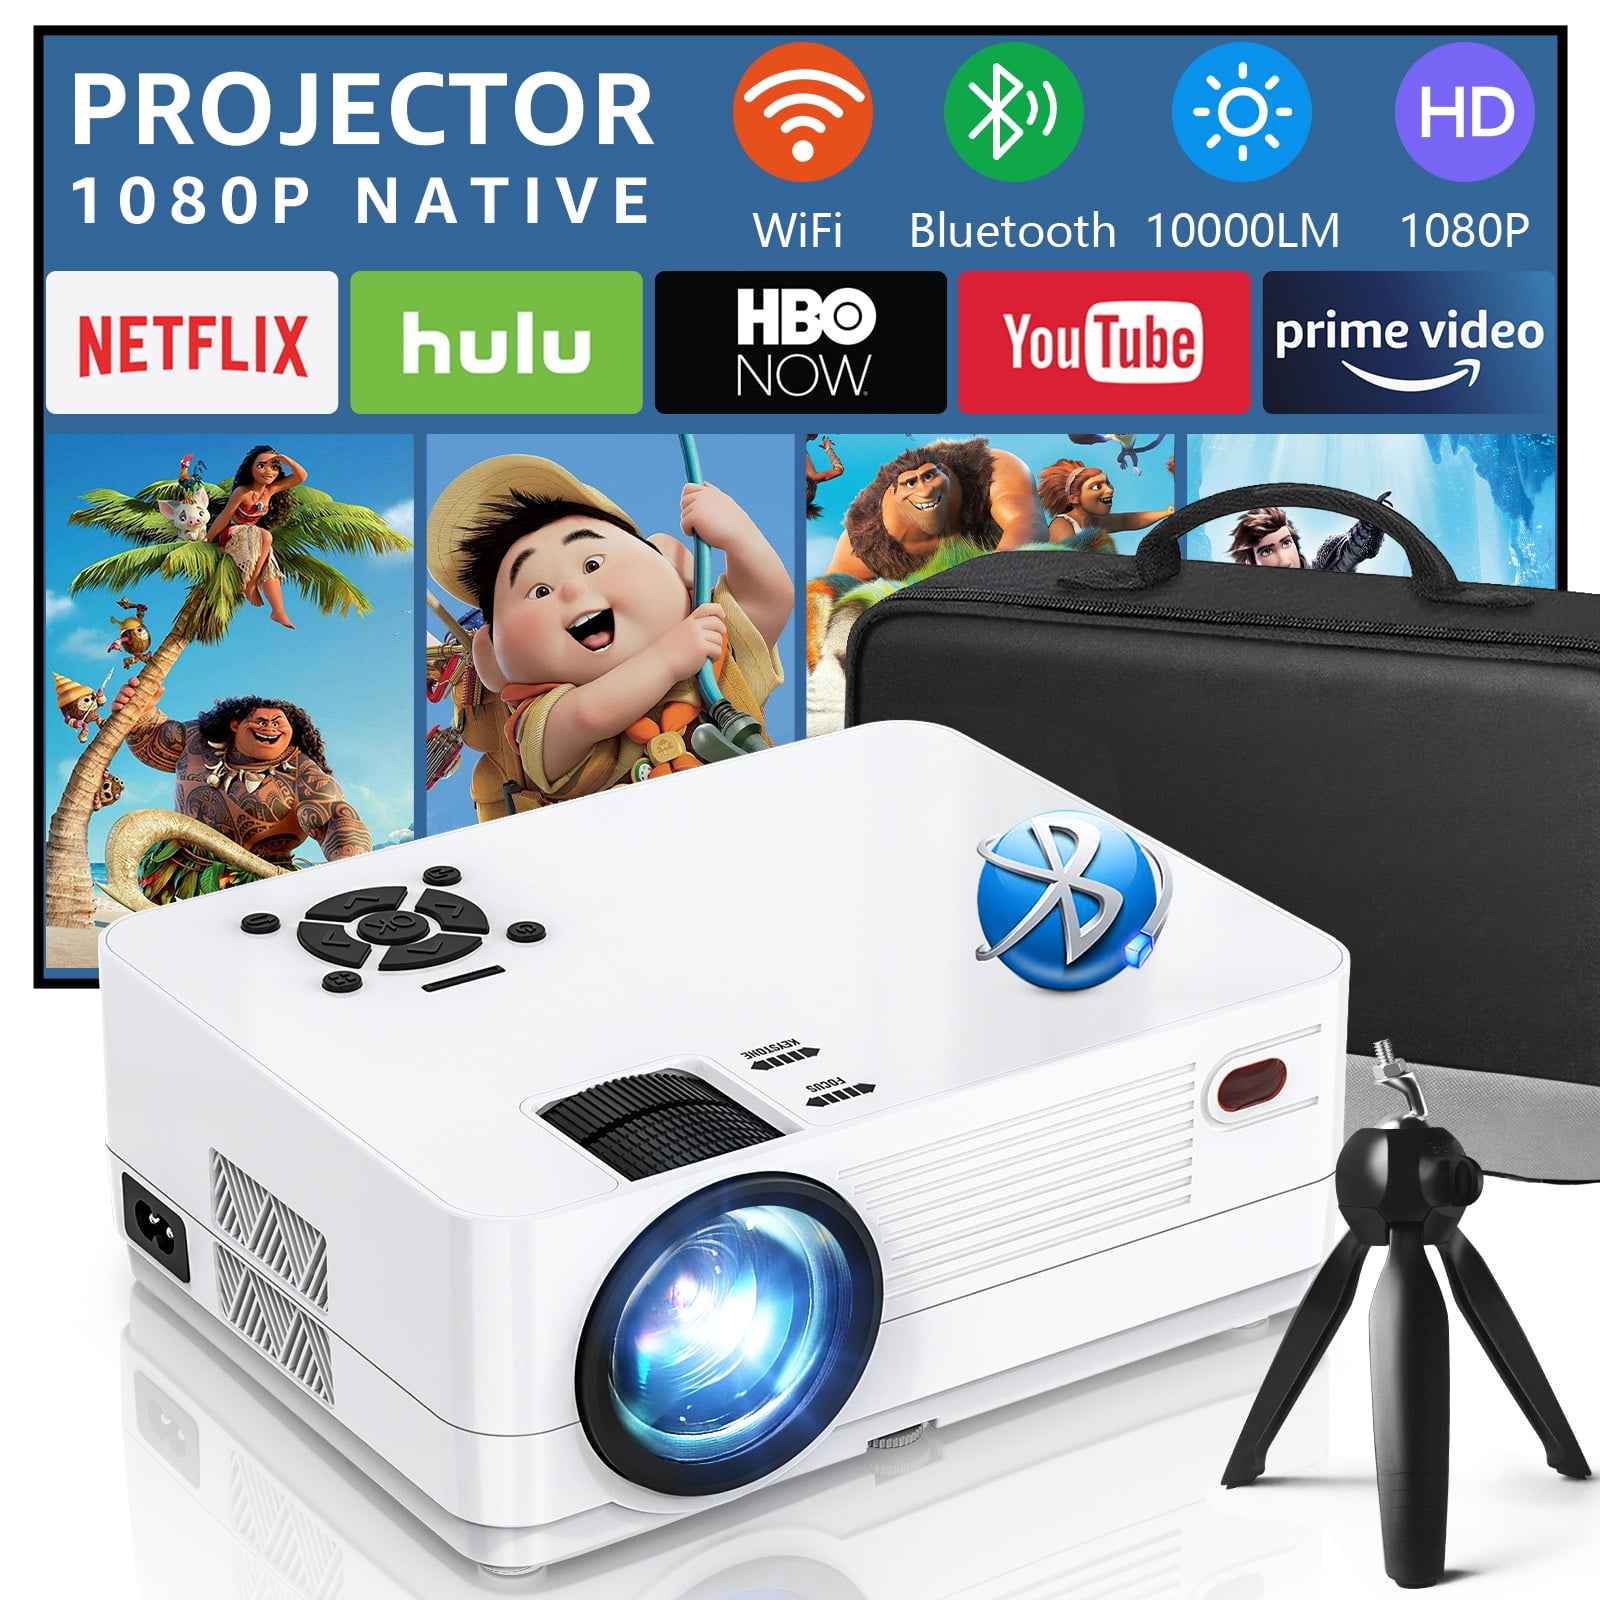 Auto Focus] Wimius Projector, Native 1080P Projector with WiFi and  Bluetooth, Smart Home Movie Projector 4K Support, 300 Large Screen, for  iOS/Android 